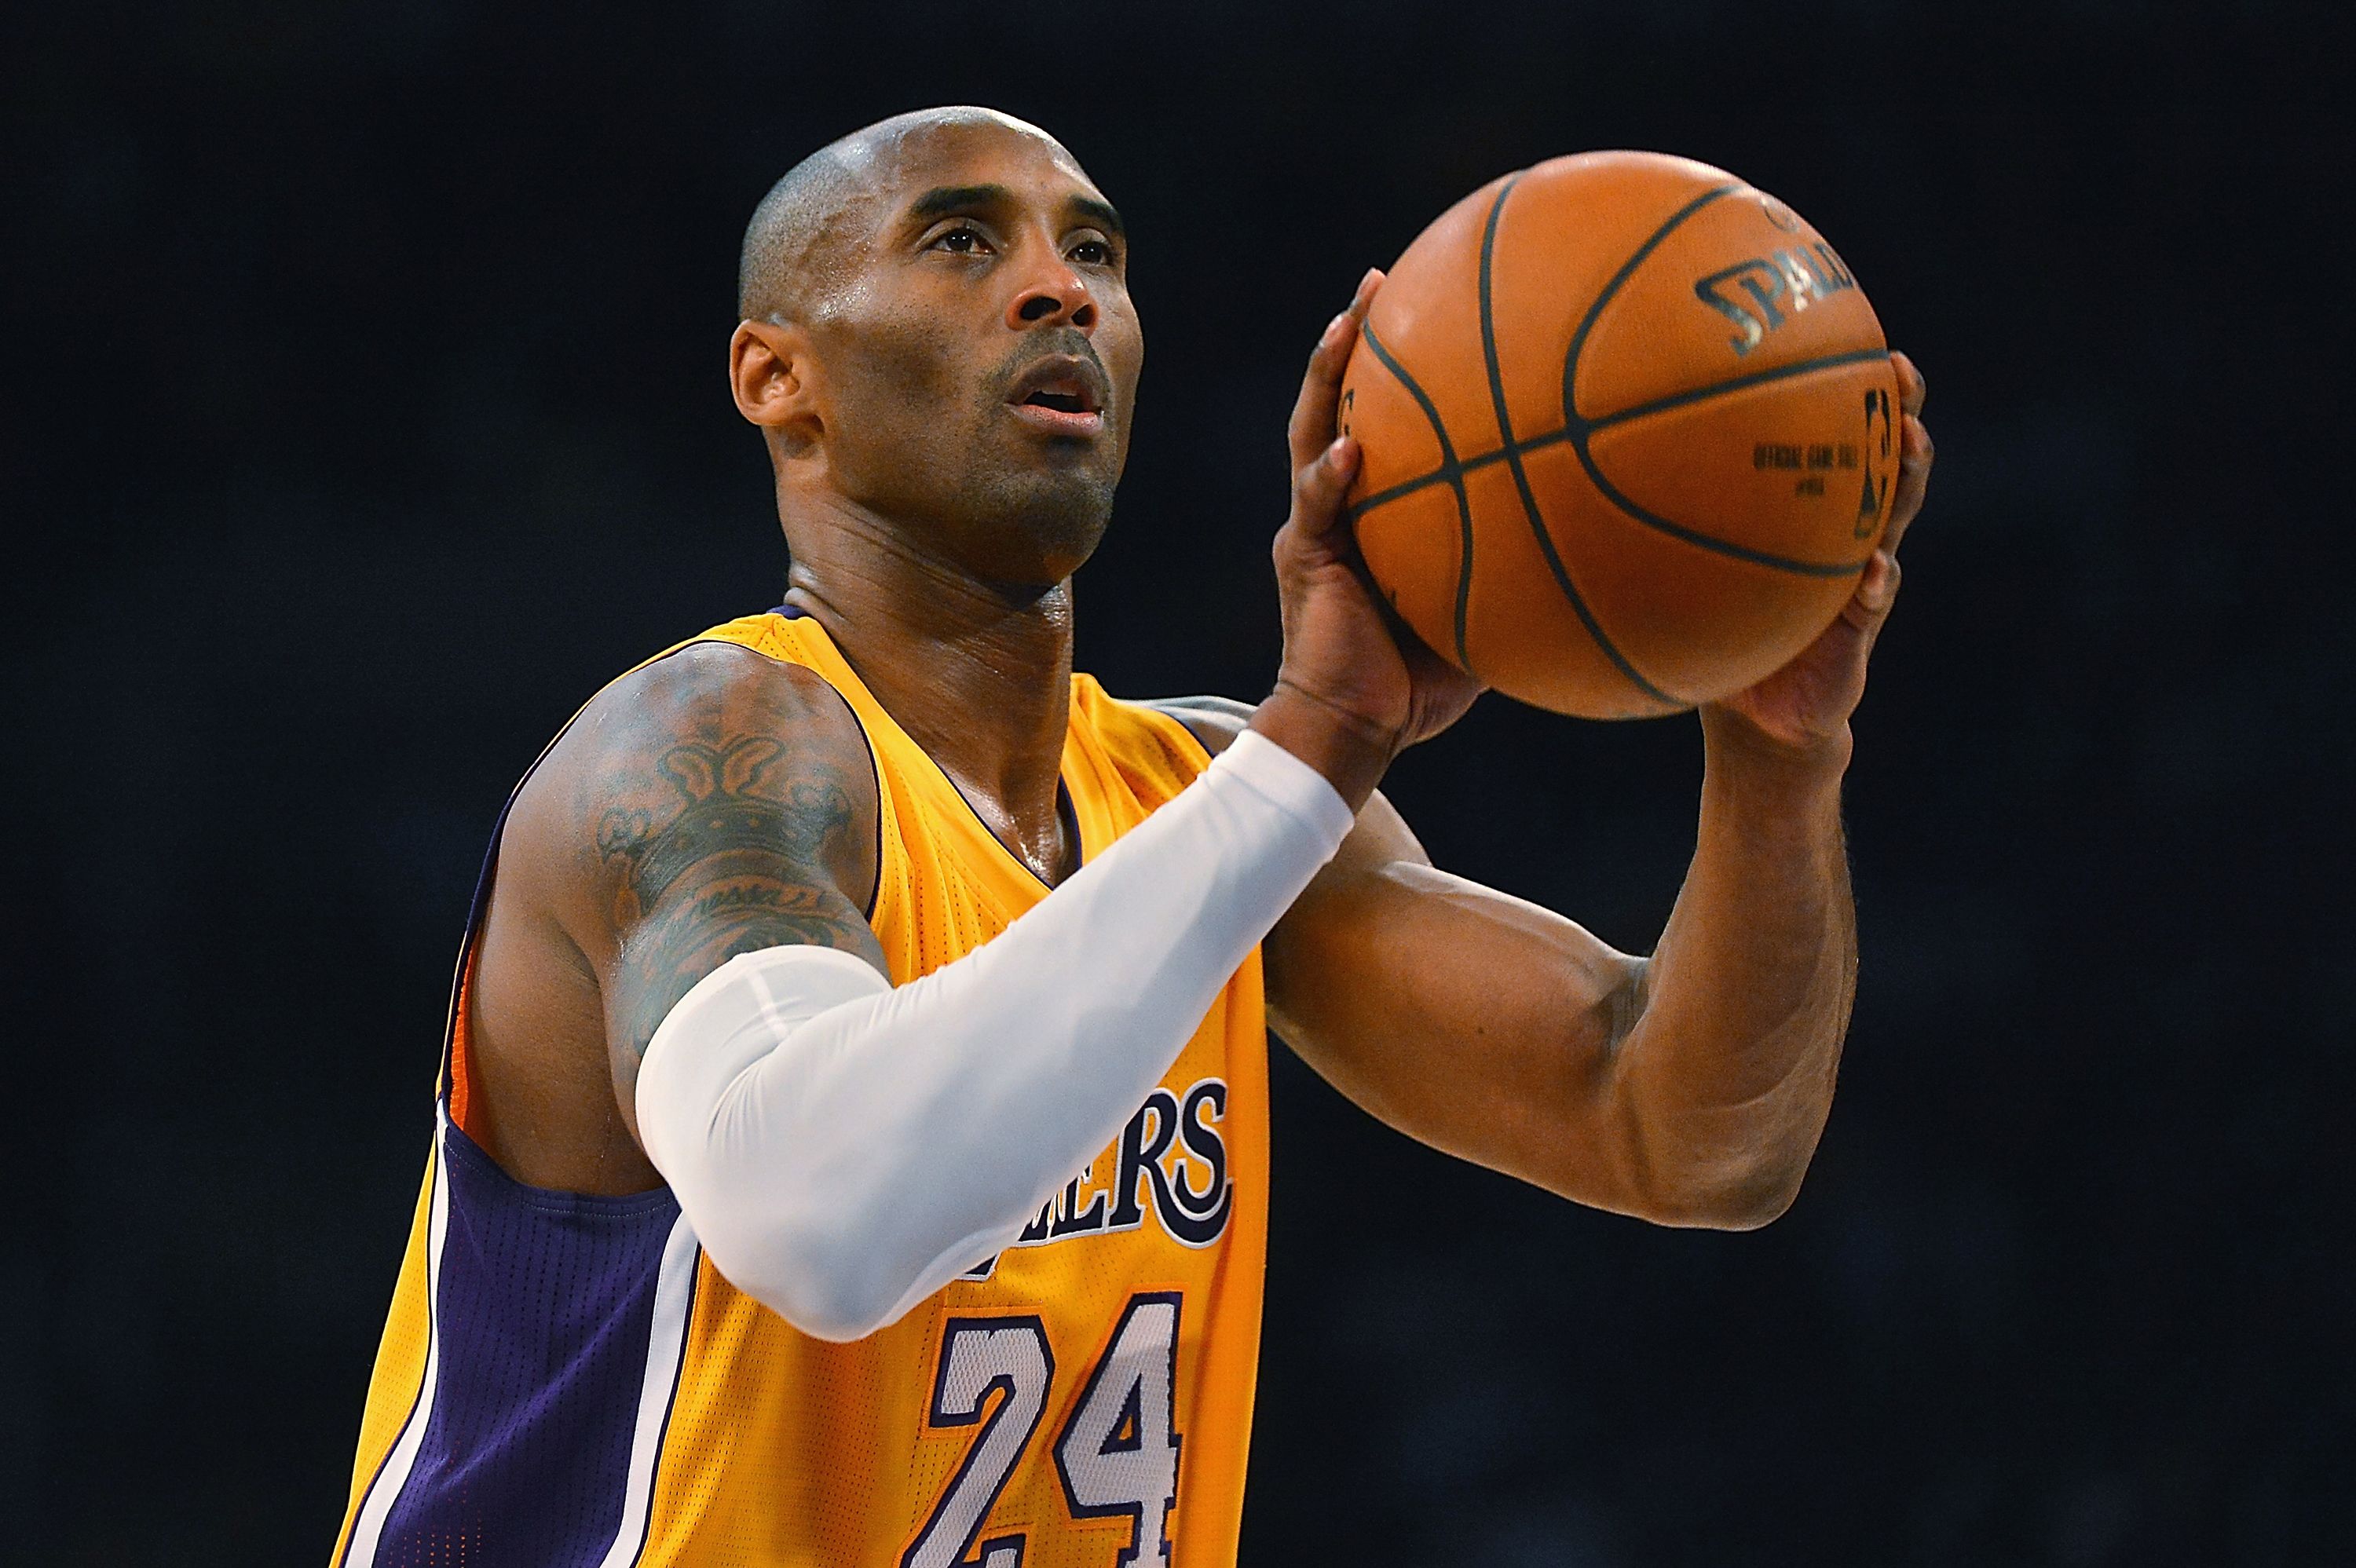 A Tunisian Player Once Asked Kobe Bryant For His Autograph And The